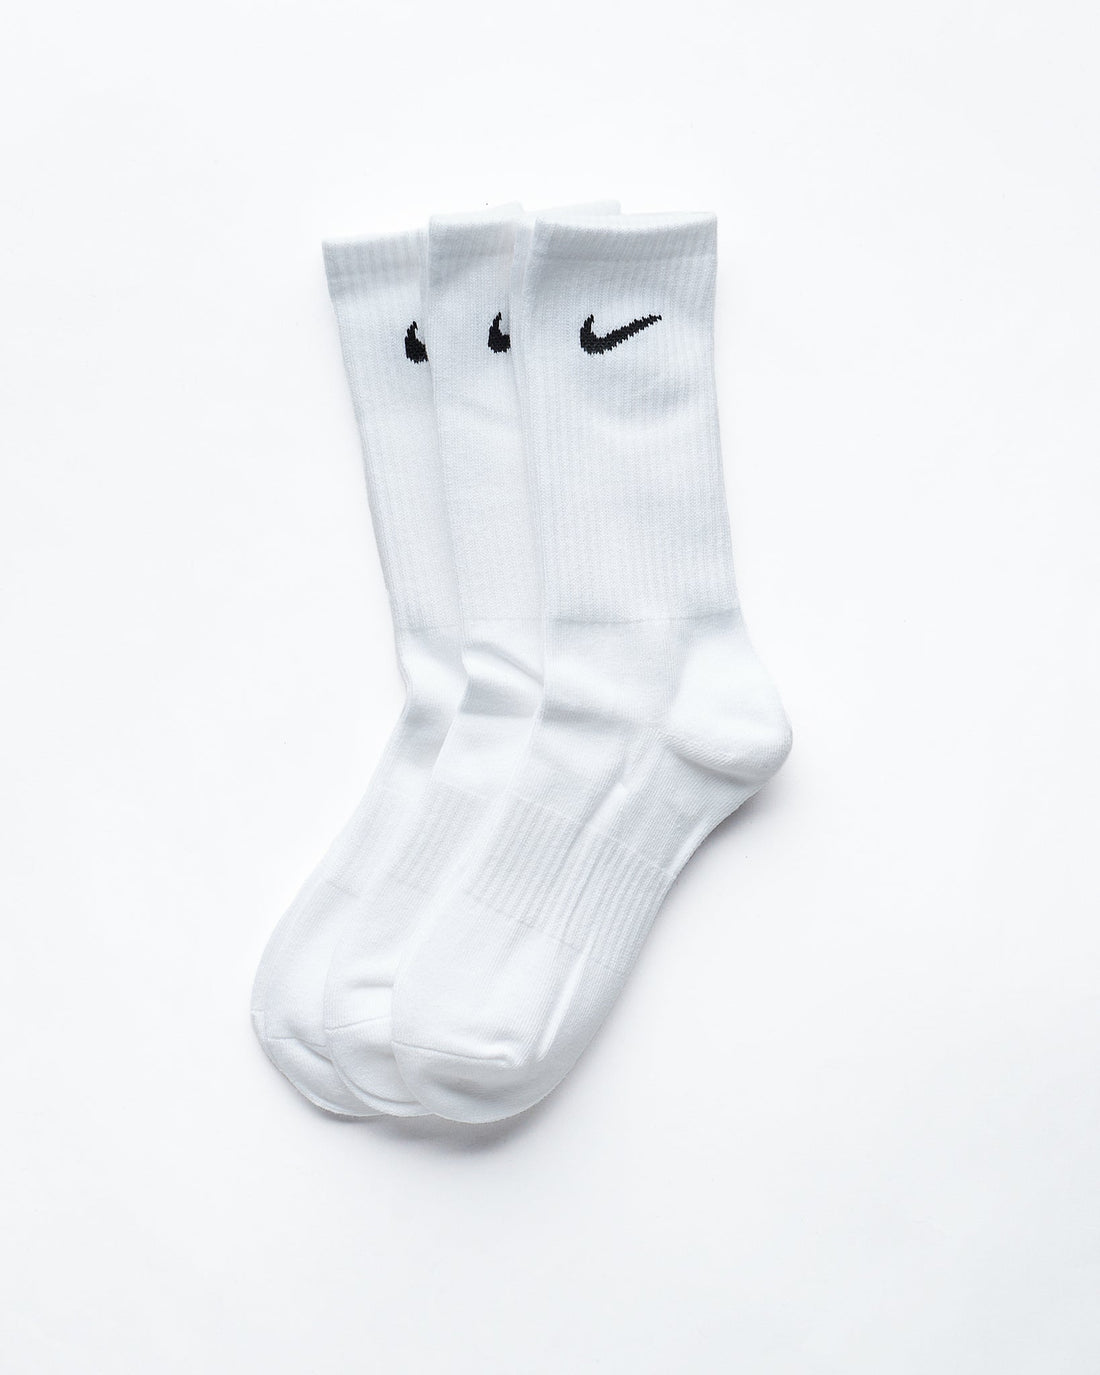 MOI OUTFIT-Logo Embroidered Mid Calf 3 Pairs Socks 8.90